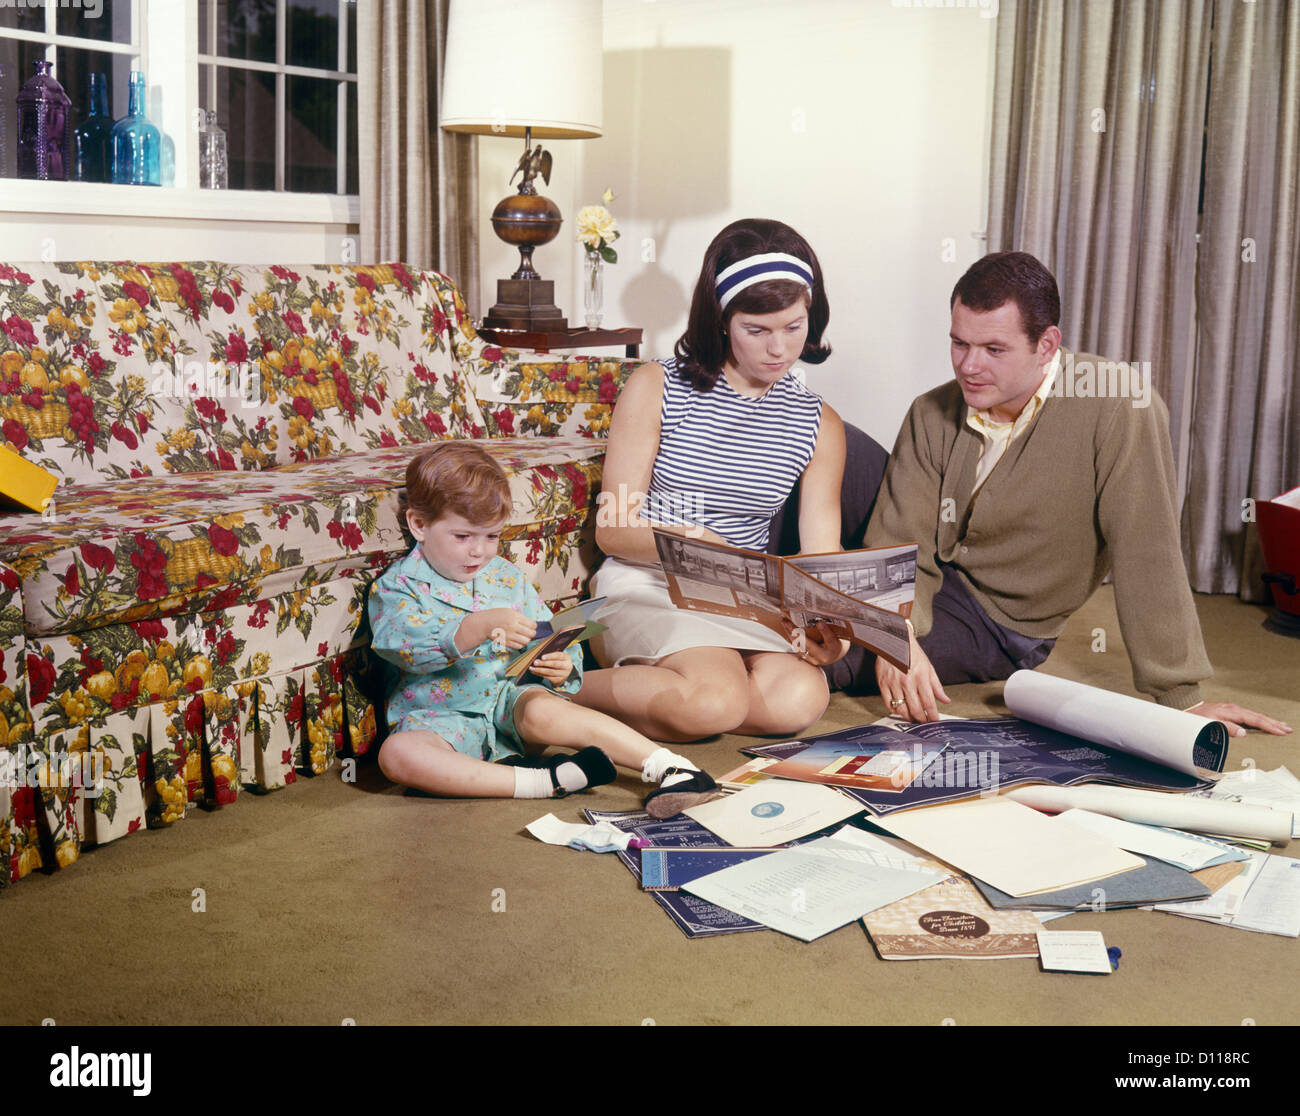 1970s FAMILY MOTHER FATHER DAUGHTER READING BLUEPRINTS PLANS FOR NEW HOME Stock Photo